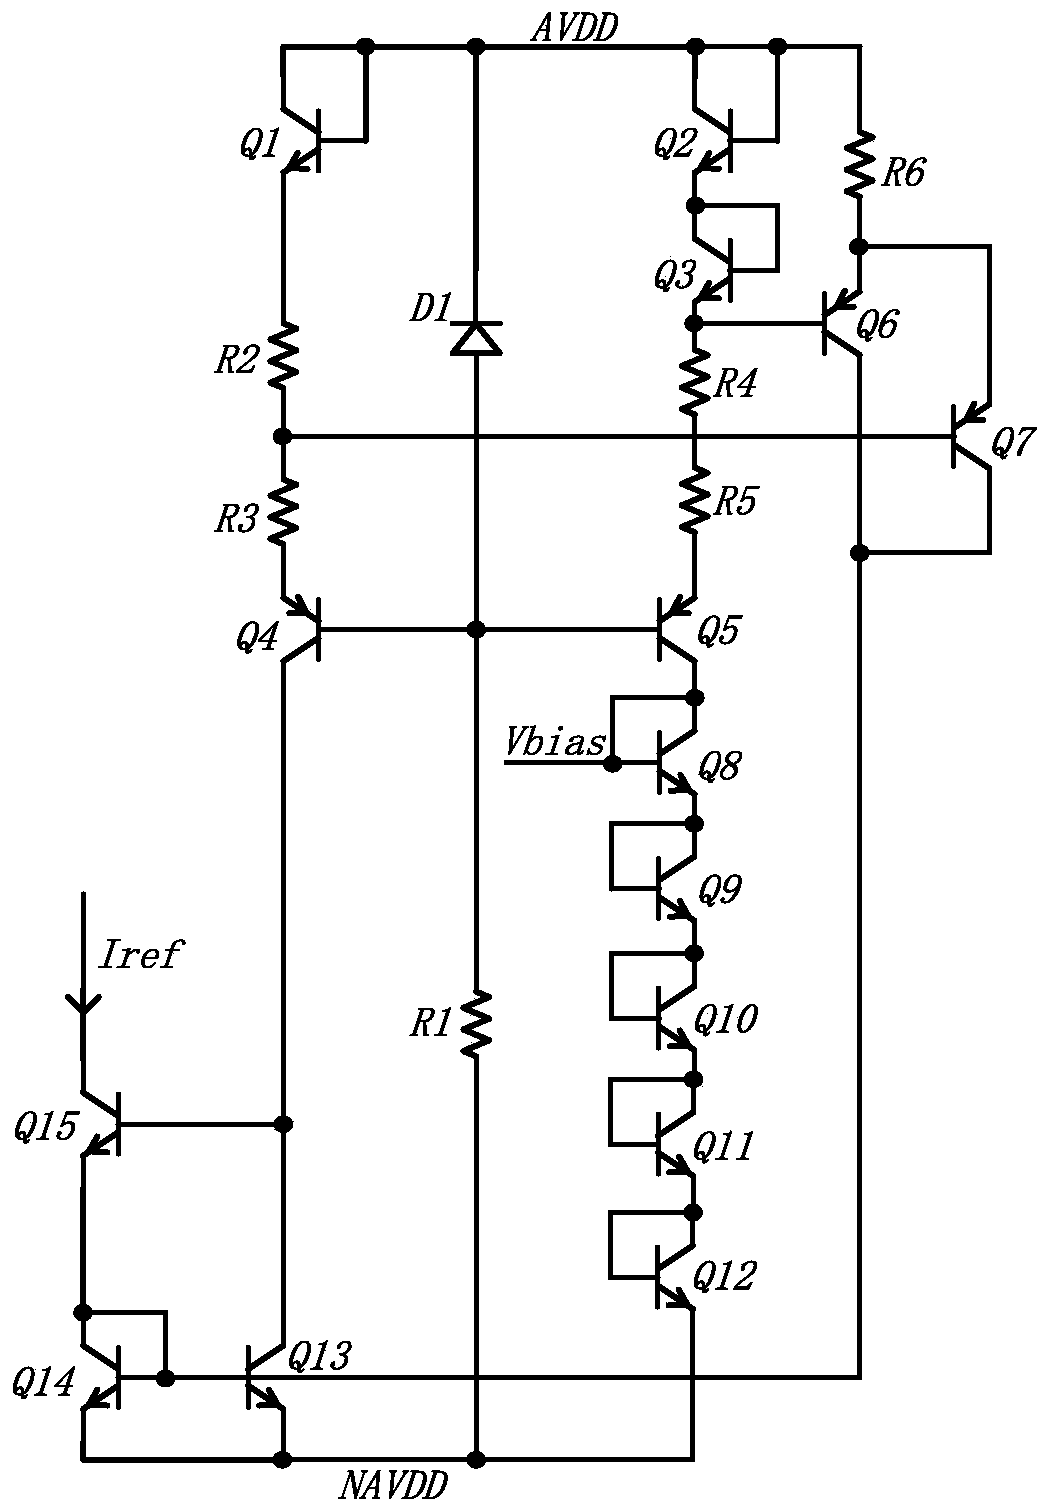 Bandgap reference starting circuit and method for wide power supply range based on radiation-resistant bipolar technology